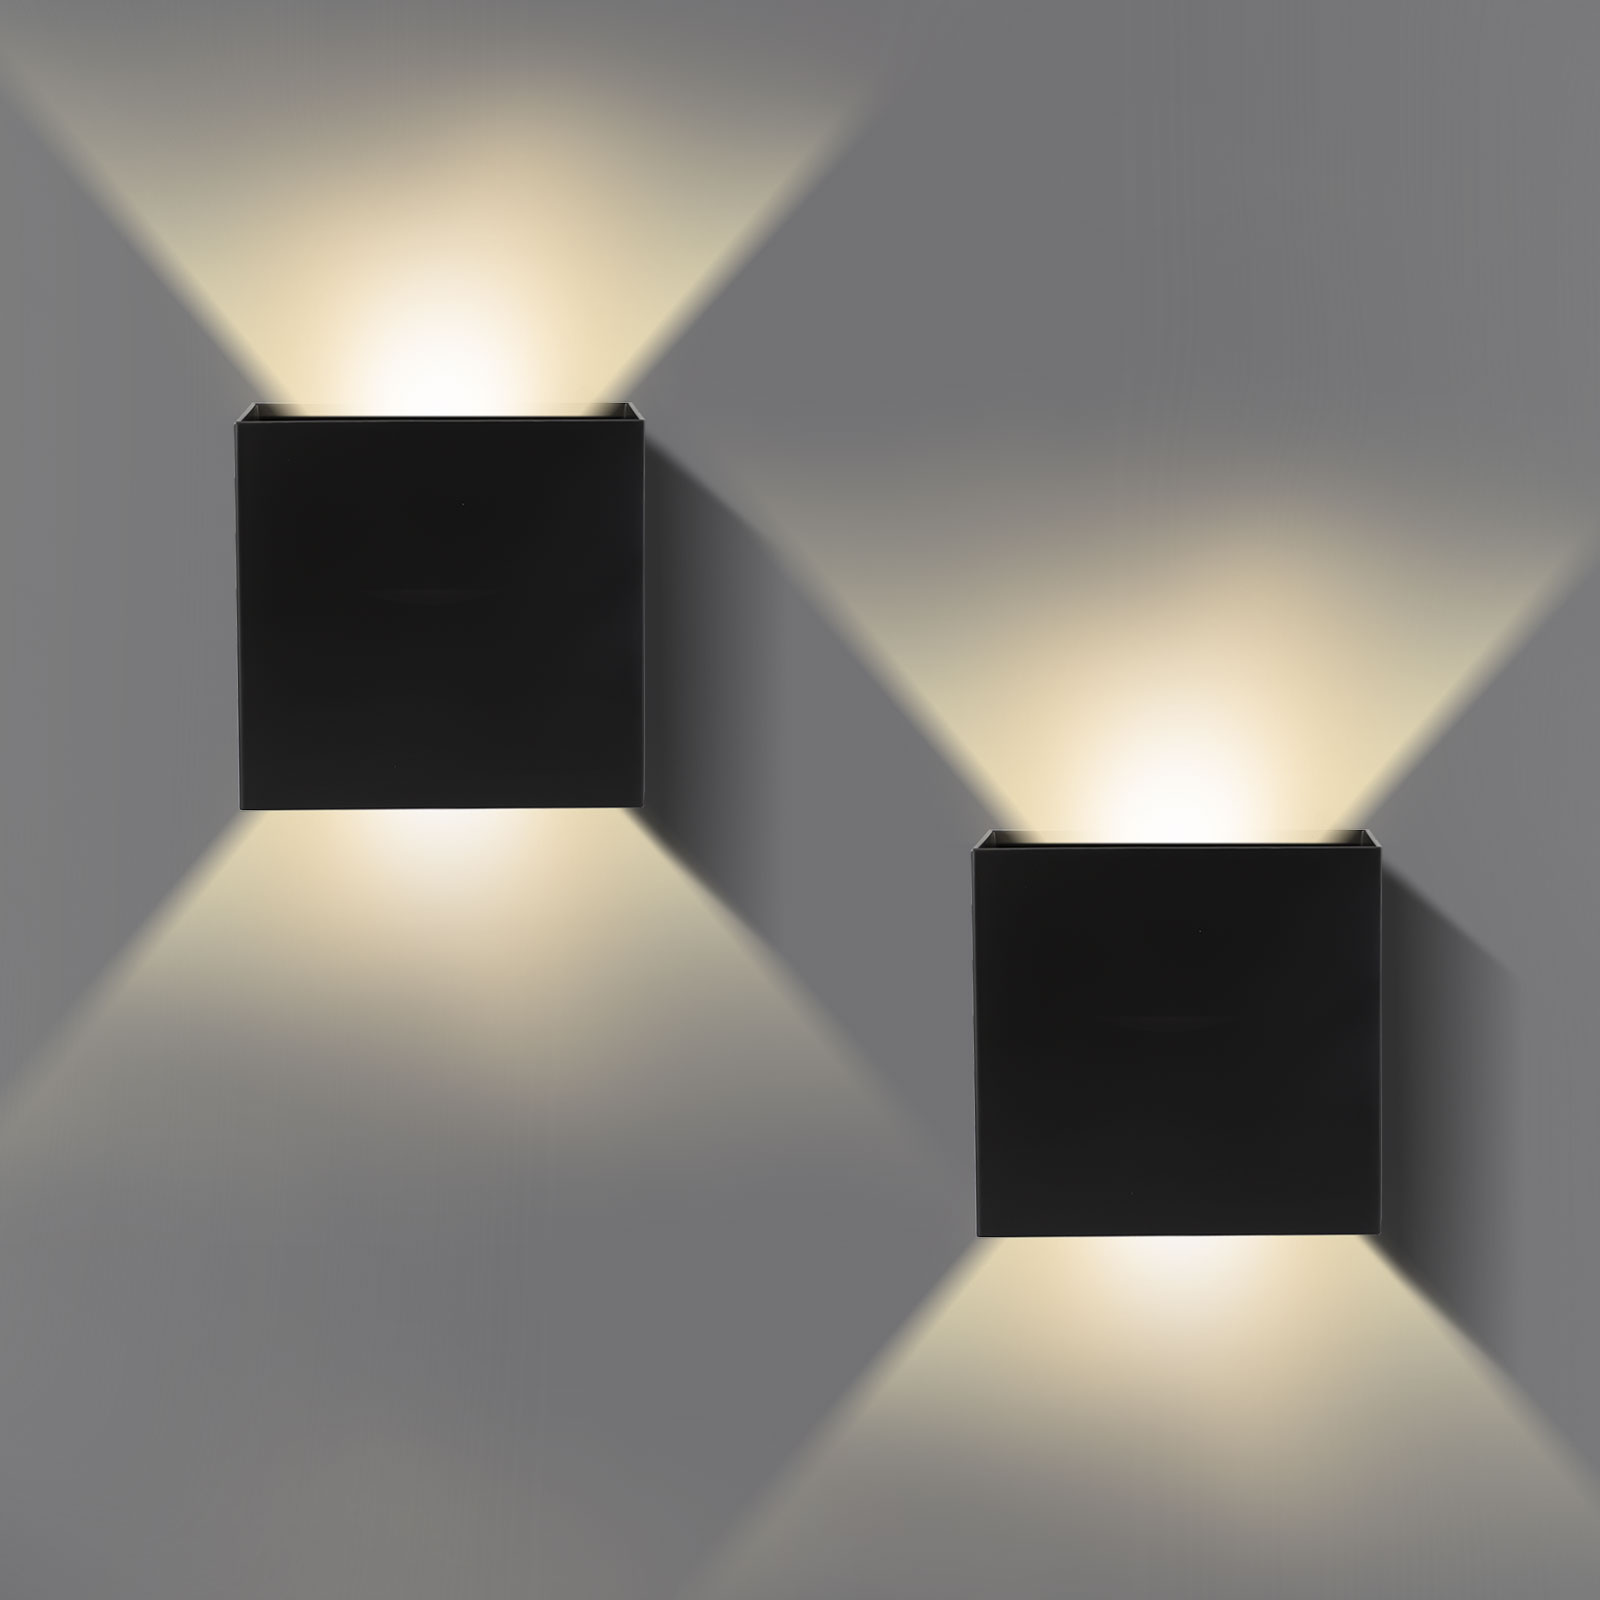 Modern LED Wall Light Up Down Cube Indoor Outdoor Sconce Lighting Lamp Fixtures 